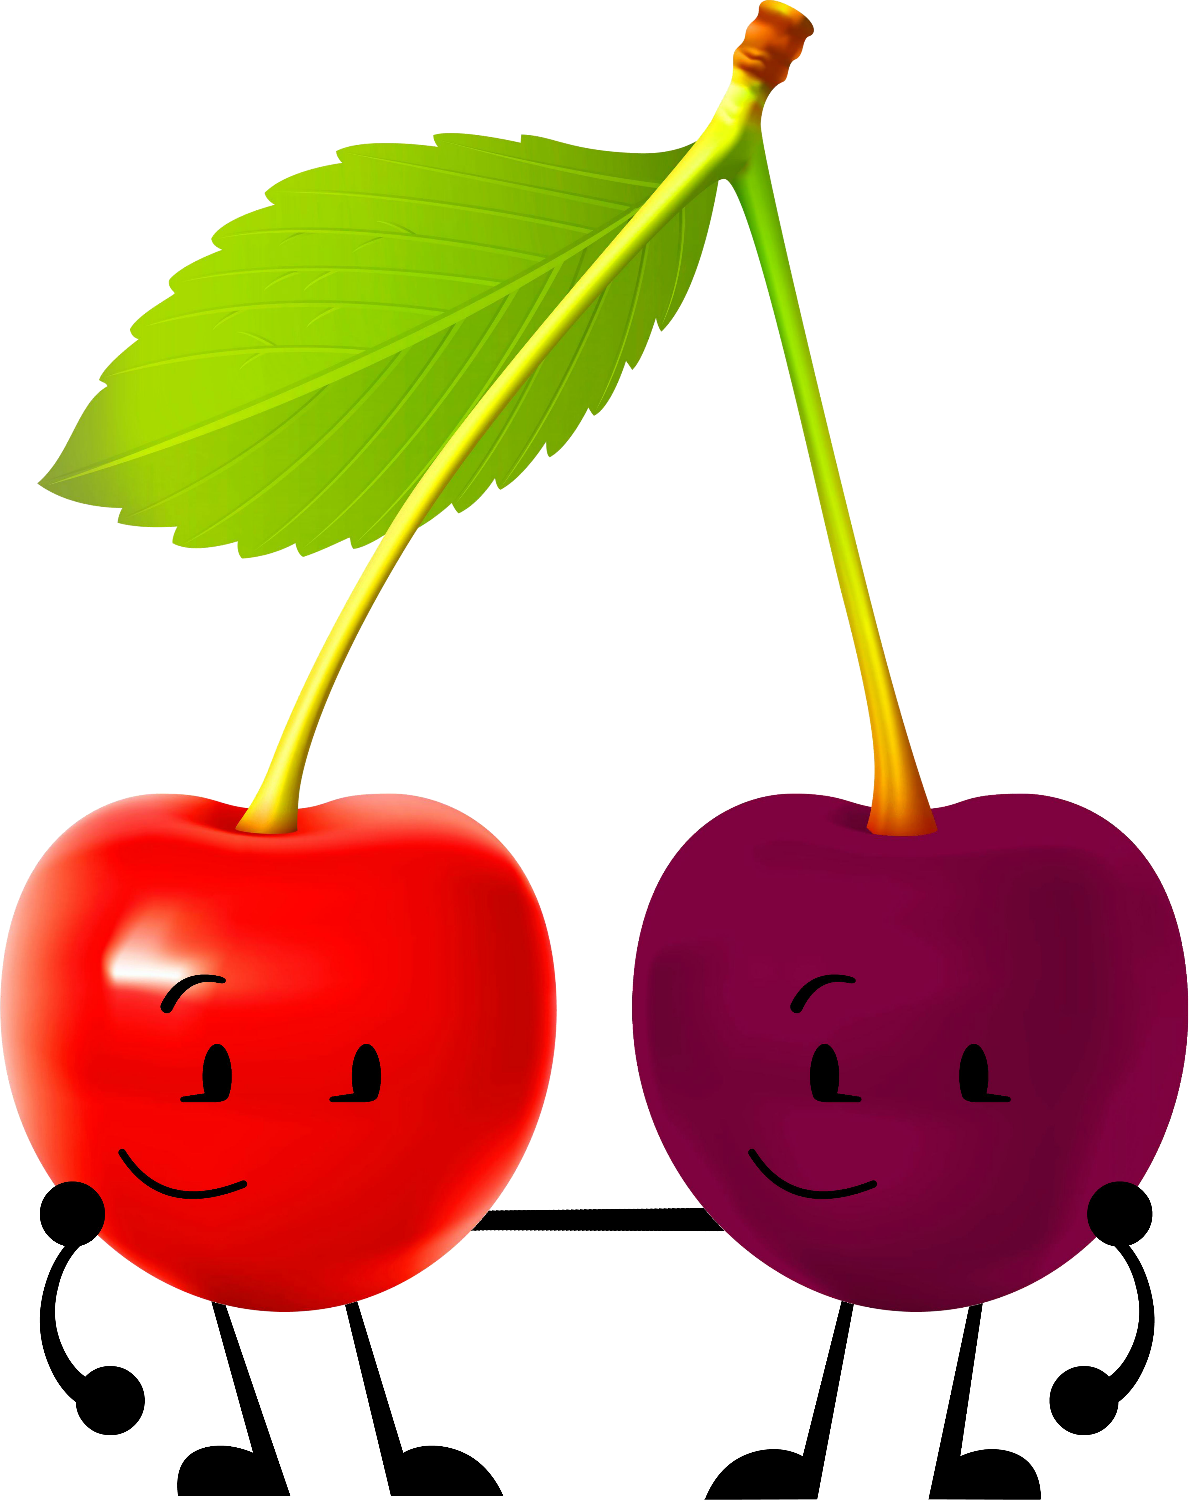 Cherries Clipart Red Object Cute Borders, Vectors, - Transparent Background Cherry (1189x1500)